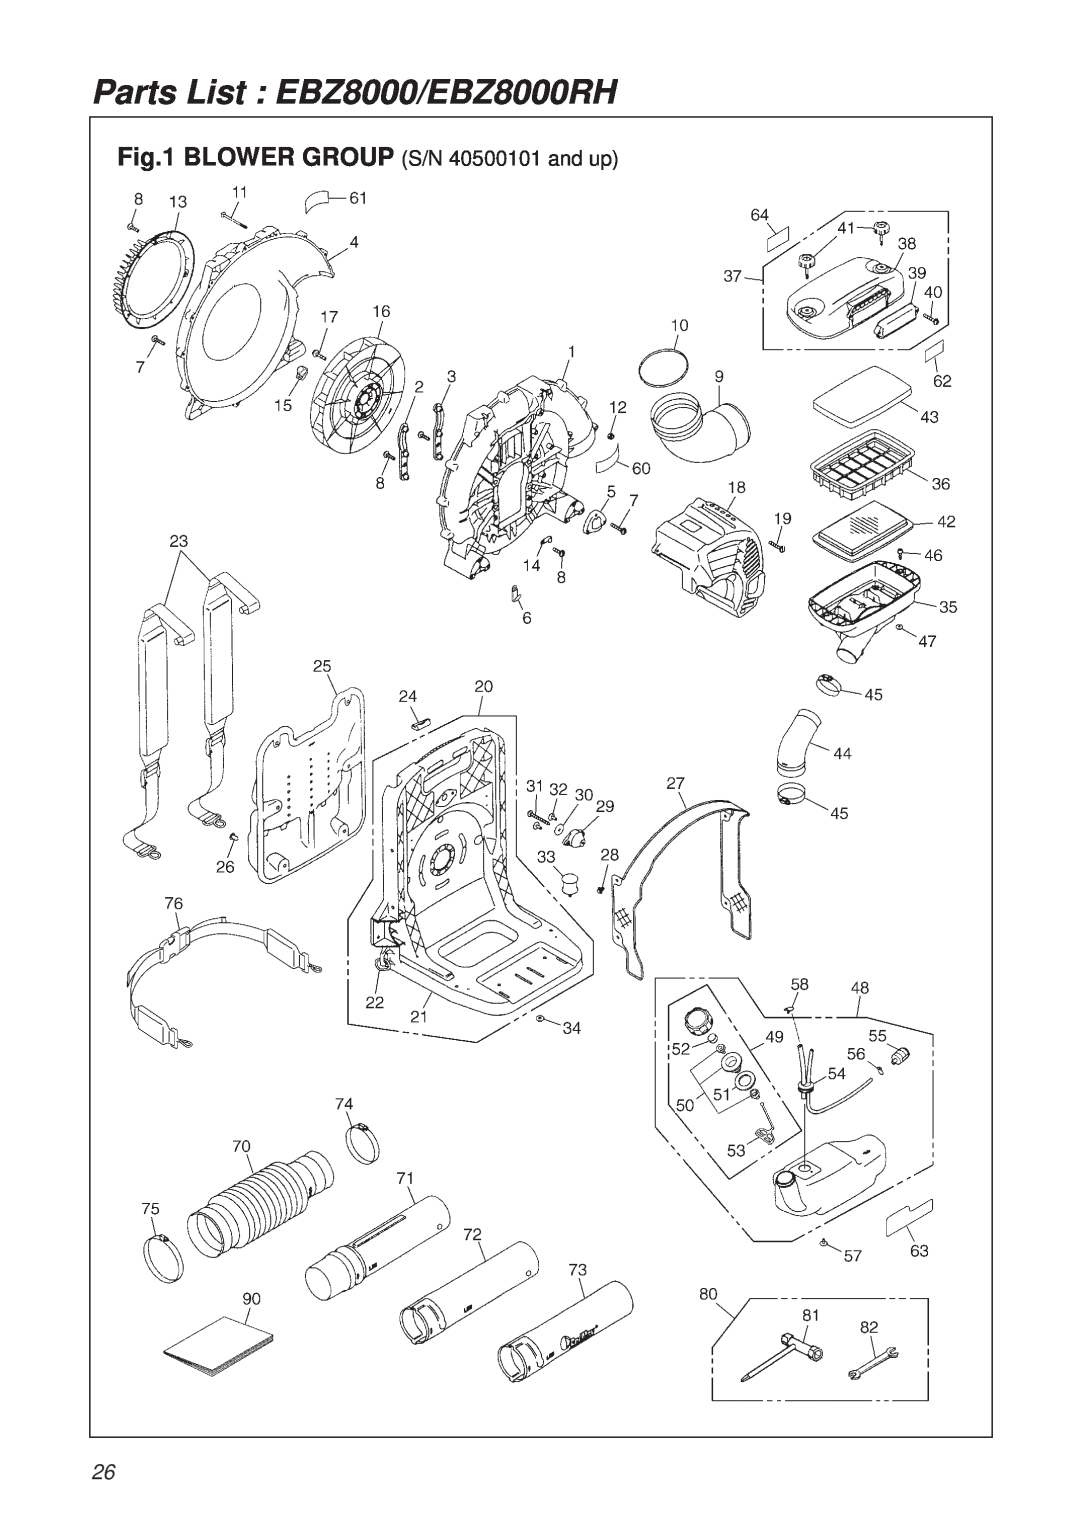 RedMax manual Parts List EBZ8000/EBZ8000RH, BLOWER GROUP S/N 40500101 and up 